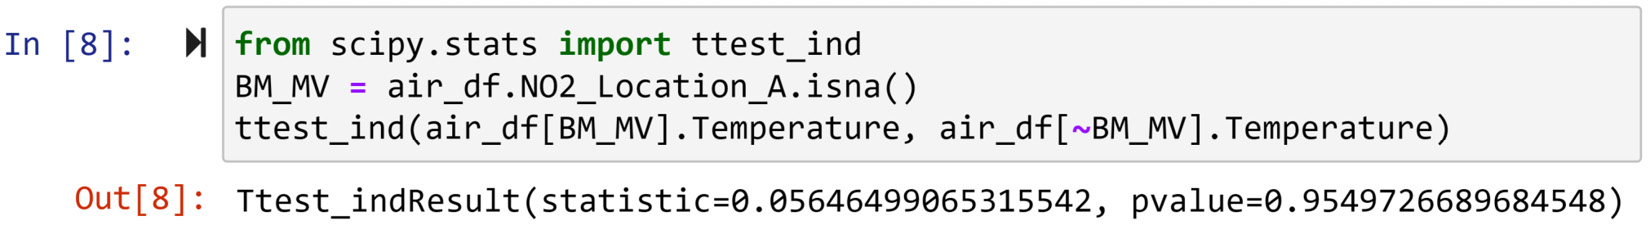 Figure 11.8 – Using t-test to evaluate whether the value of temperature is different in NO2_Location_A between data objects with missing values and without missing values 
